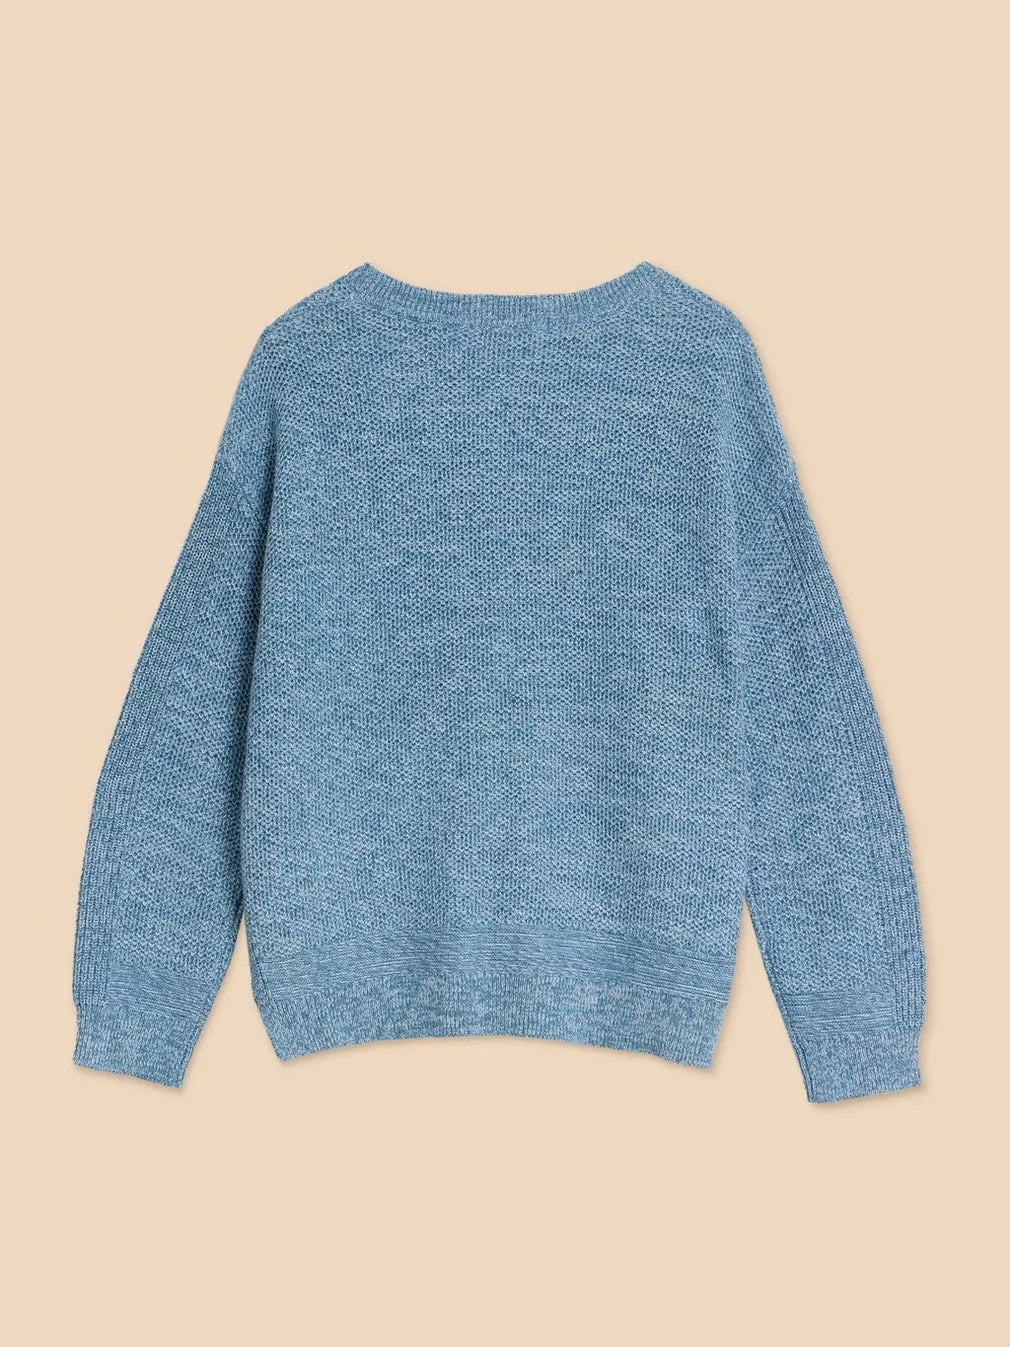 White Stuff Northbank Jumper - Mid Blue Clothing - Tops - Sweaters - Pullovers - Heavy Knit Pullovers by White Stuff | Grace the Boutique